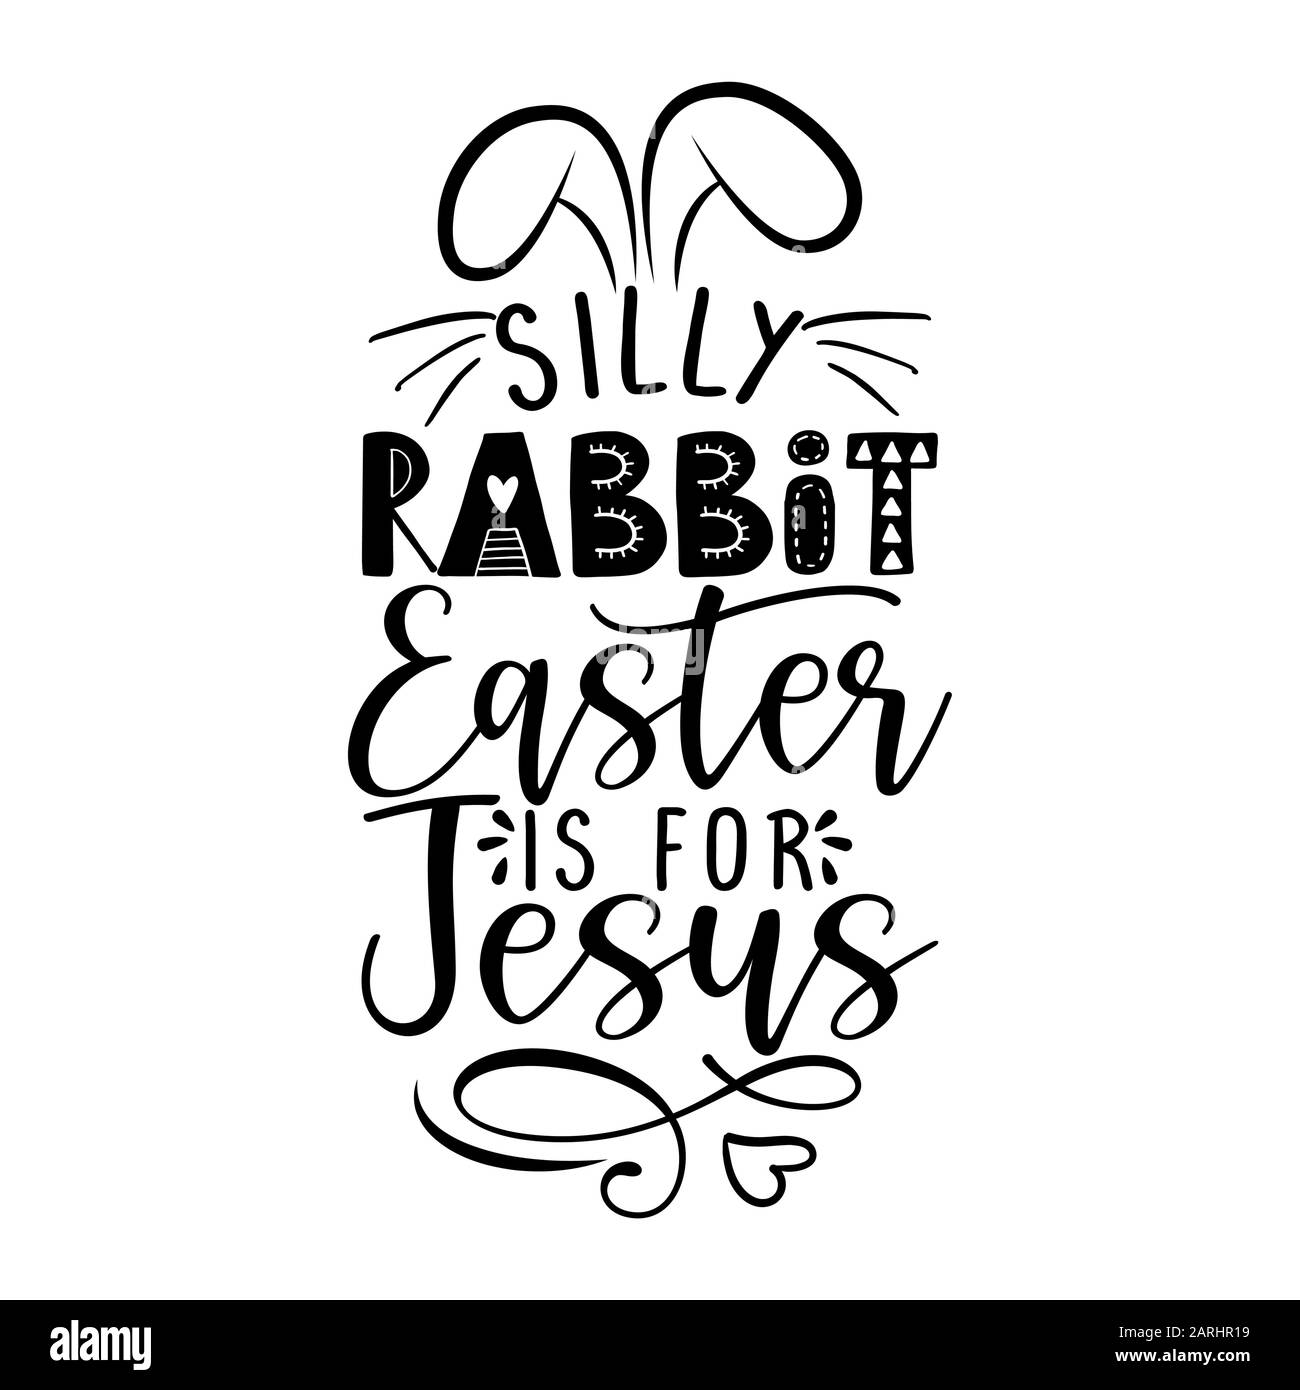 Silly rabbit, Easter is for Jesus - Calligraphy phrase for Easter holiday. Hand drawn lettering greeting cards, invitations. Good for t-shirt, mug, sc Stock Vector